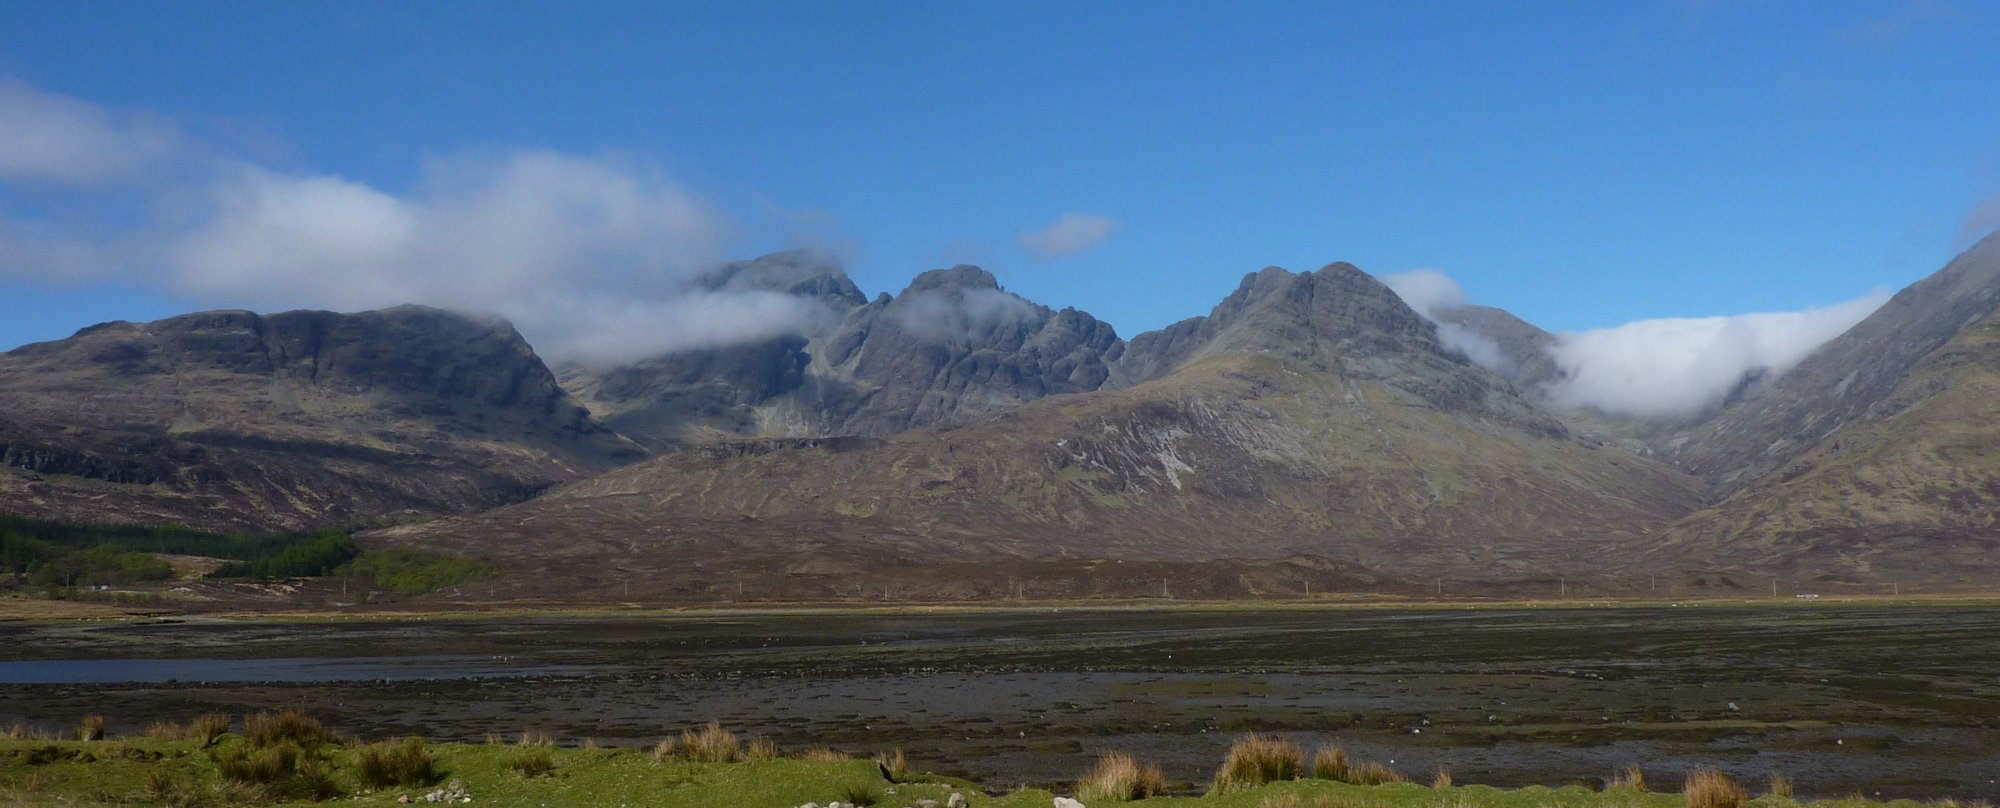 Bla Bheinn from the other side of Loch Slapin, looking even more impressive